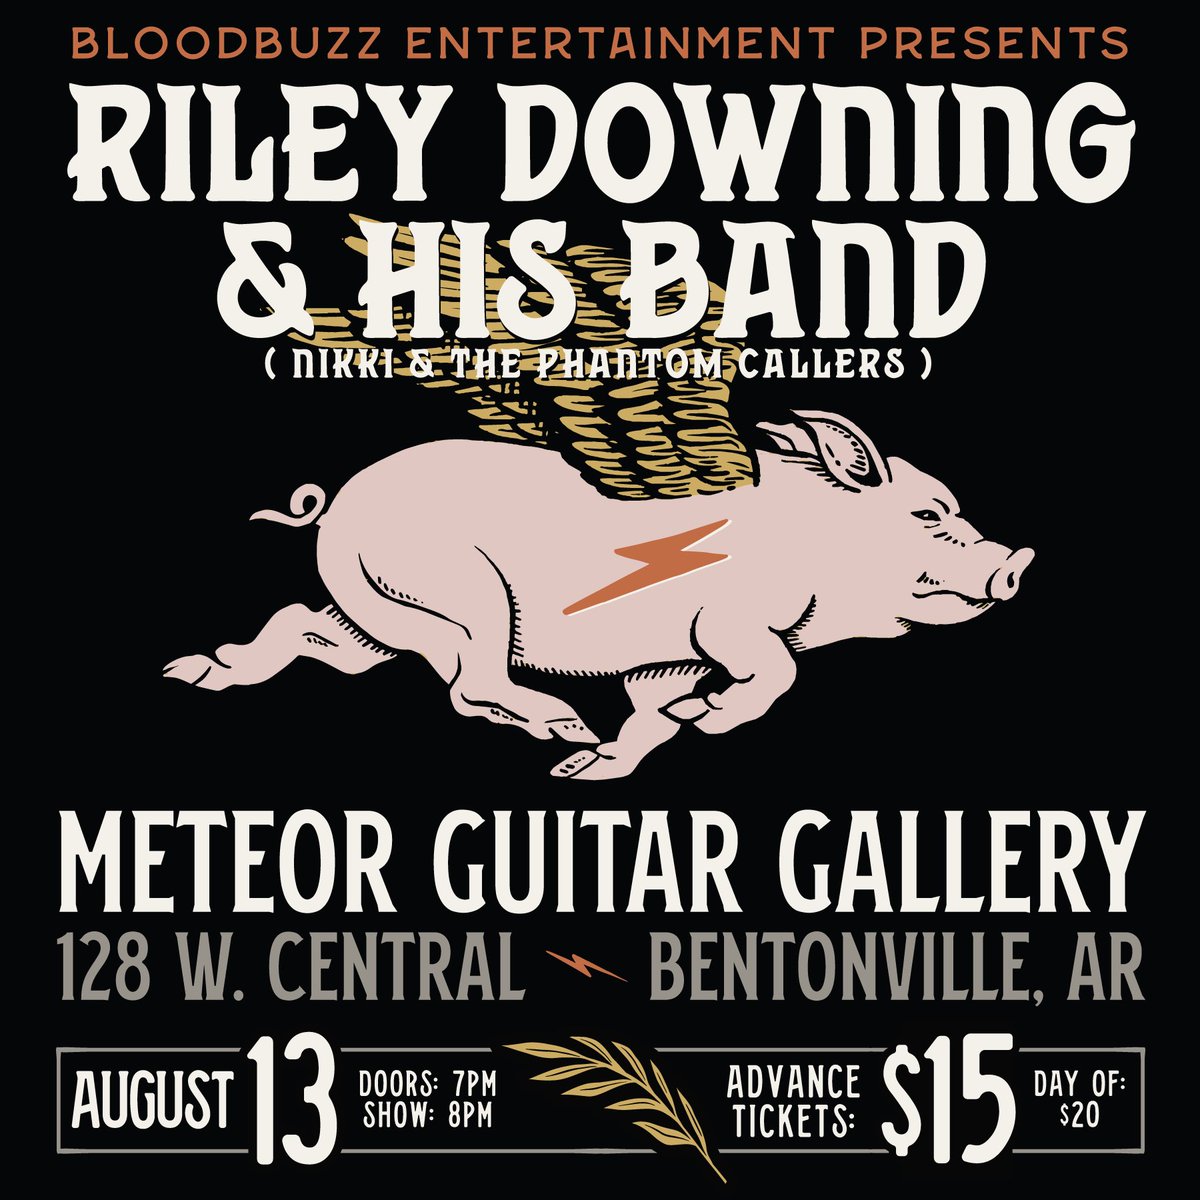 Riley Downing returns to #Bentonville and the @meteorguitar on 8/13 with a full band! Tickets on sale now! eventbrite.com/e/riley-downin…